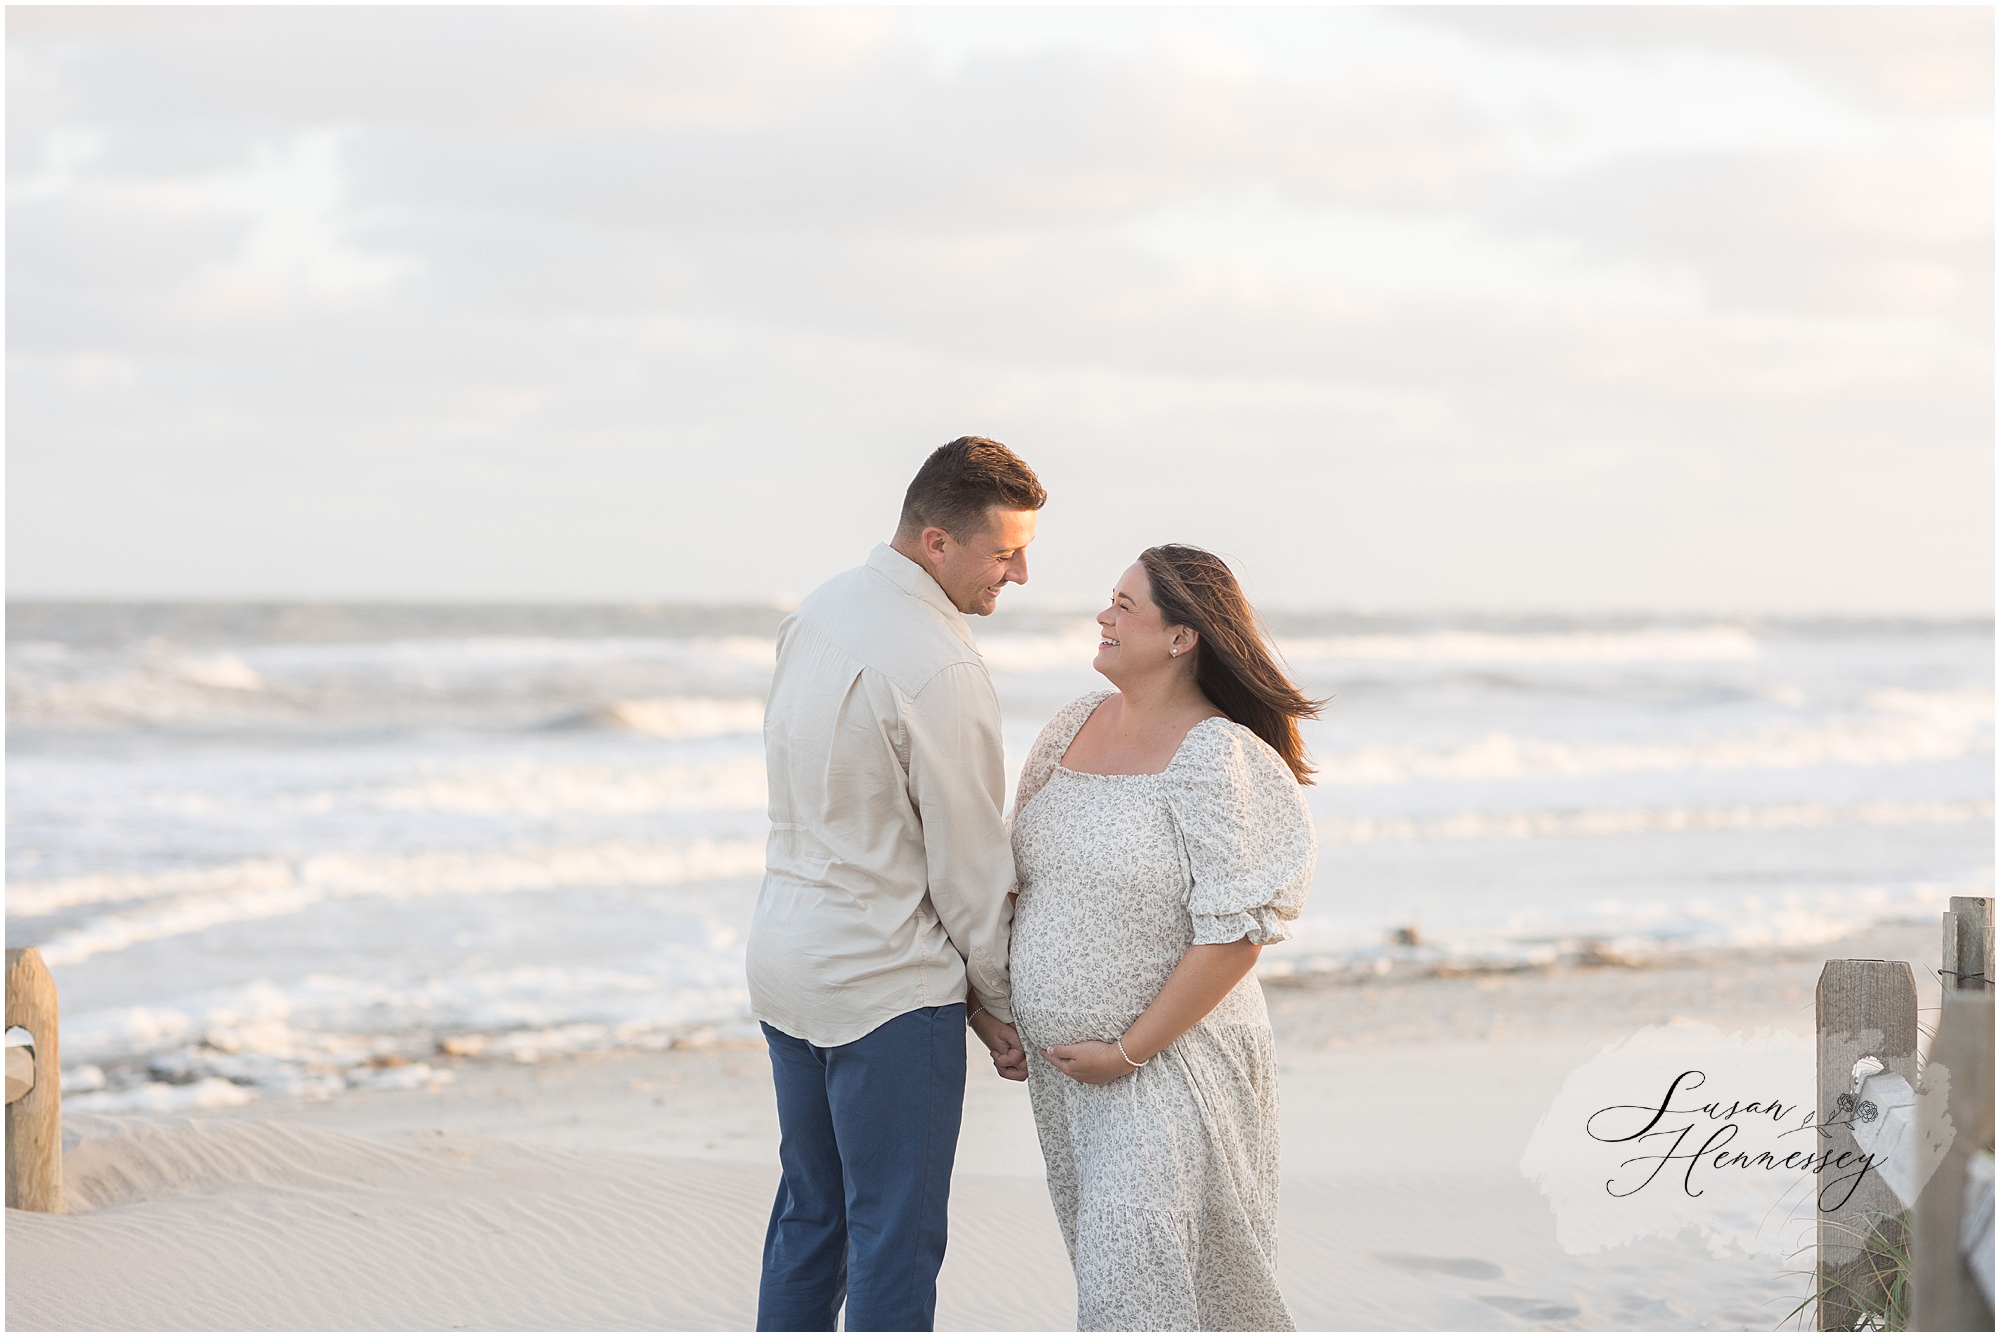 Beach maternity session at the jersey shore